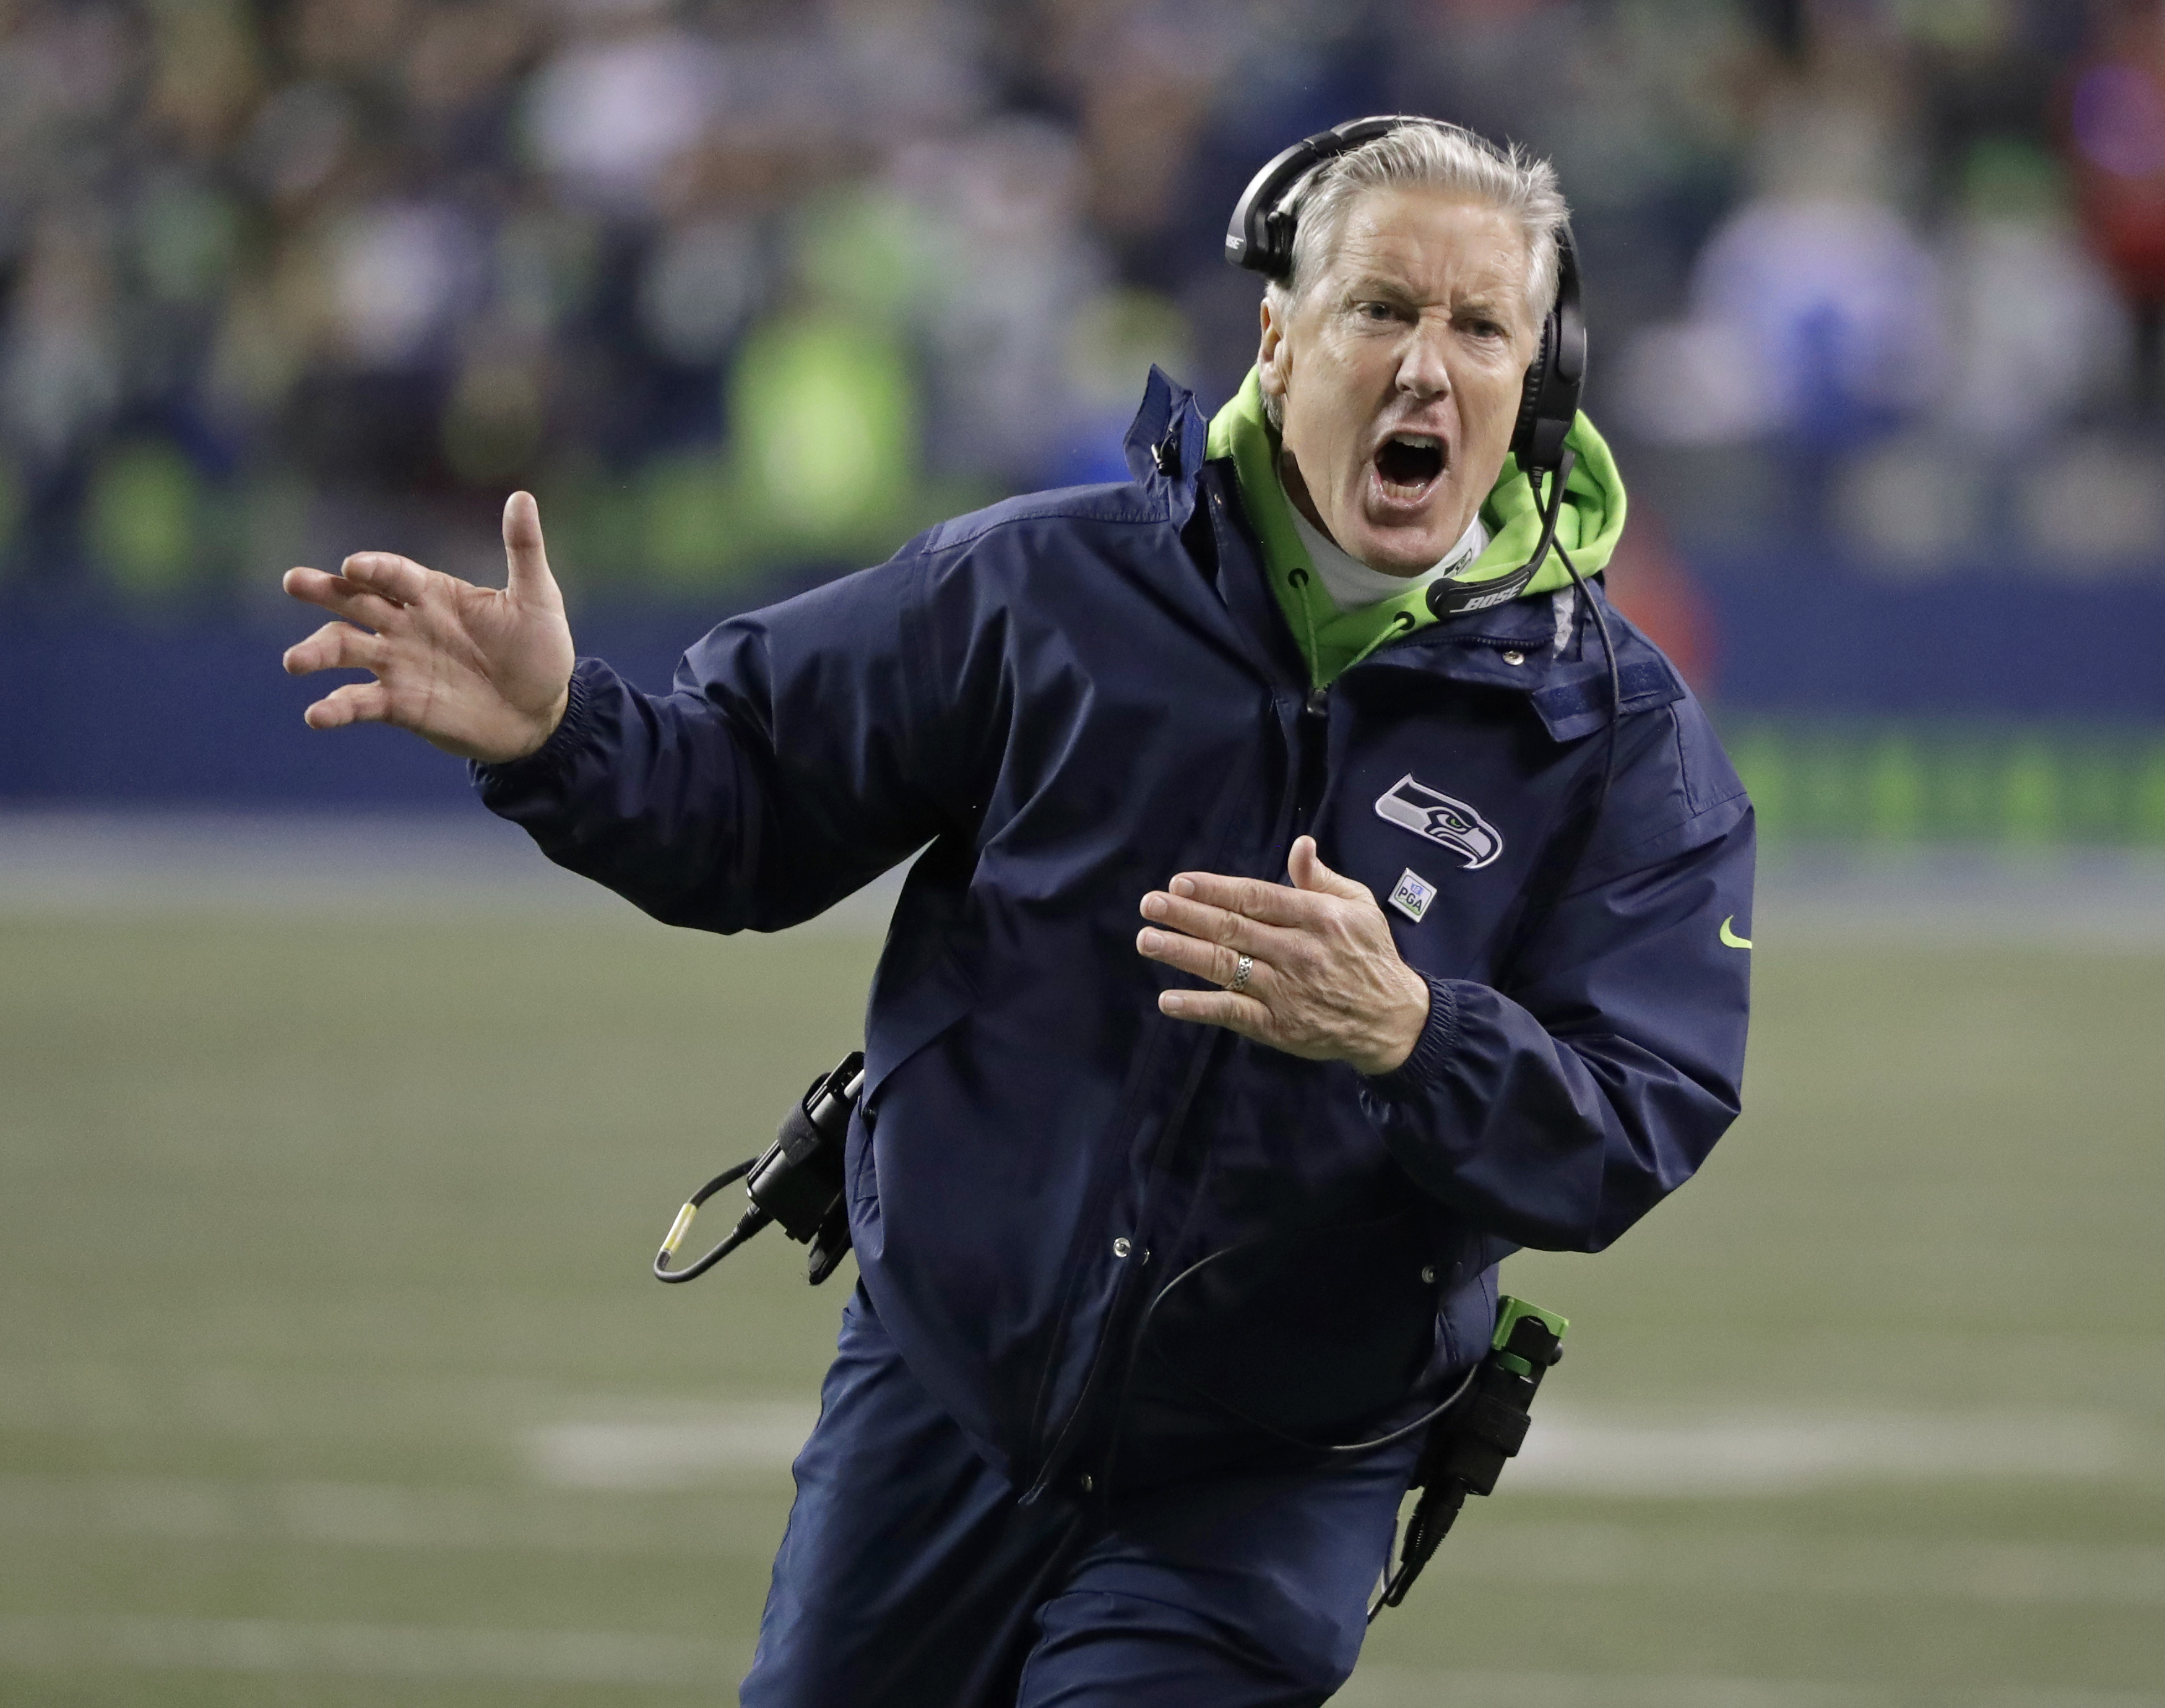 Seahawks sign coach Pete Carroll to extension through 2021